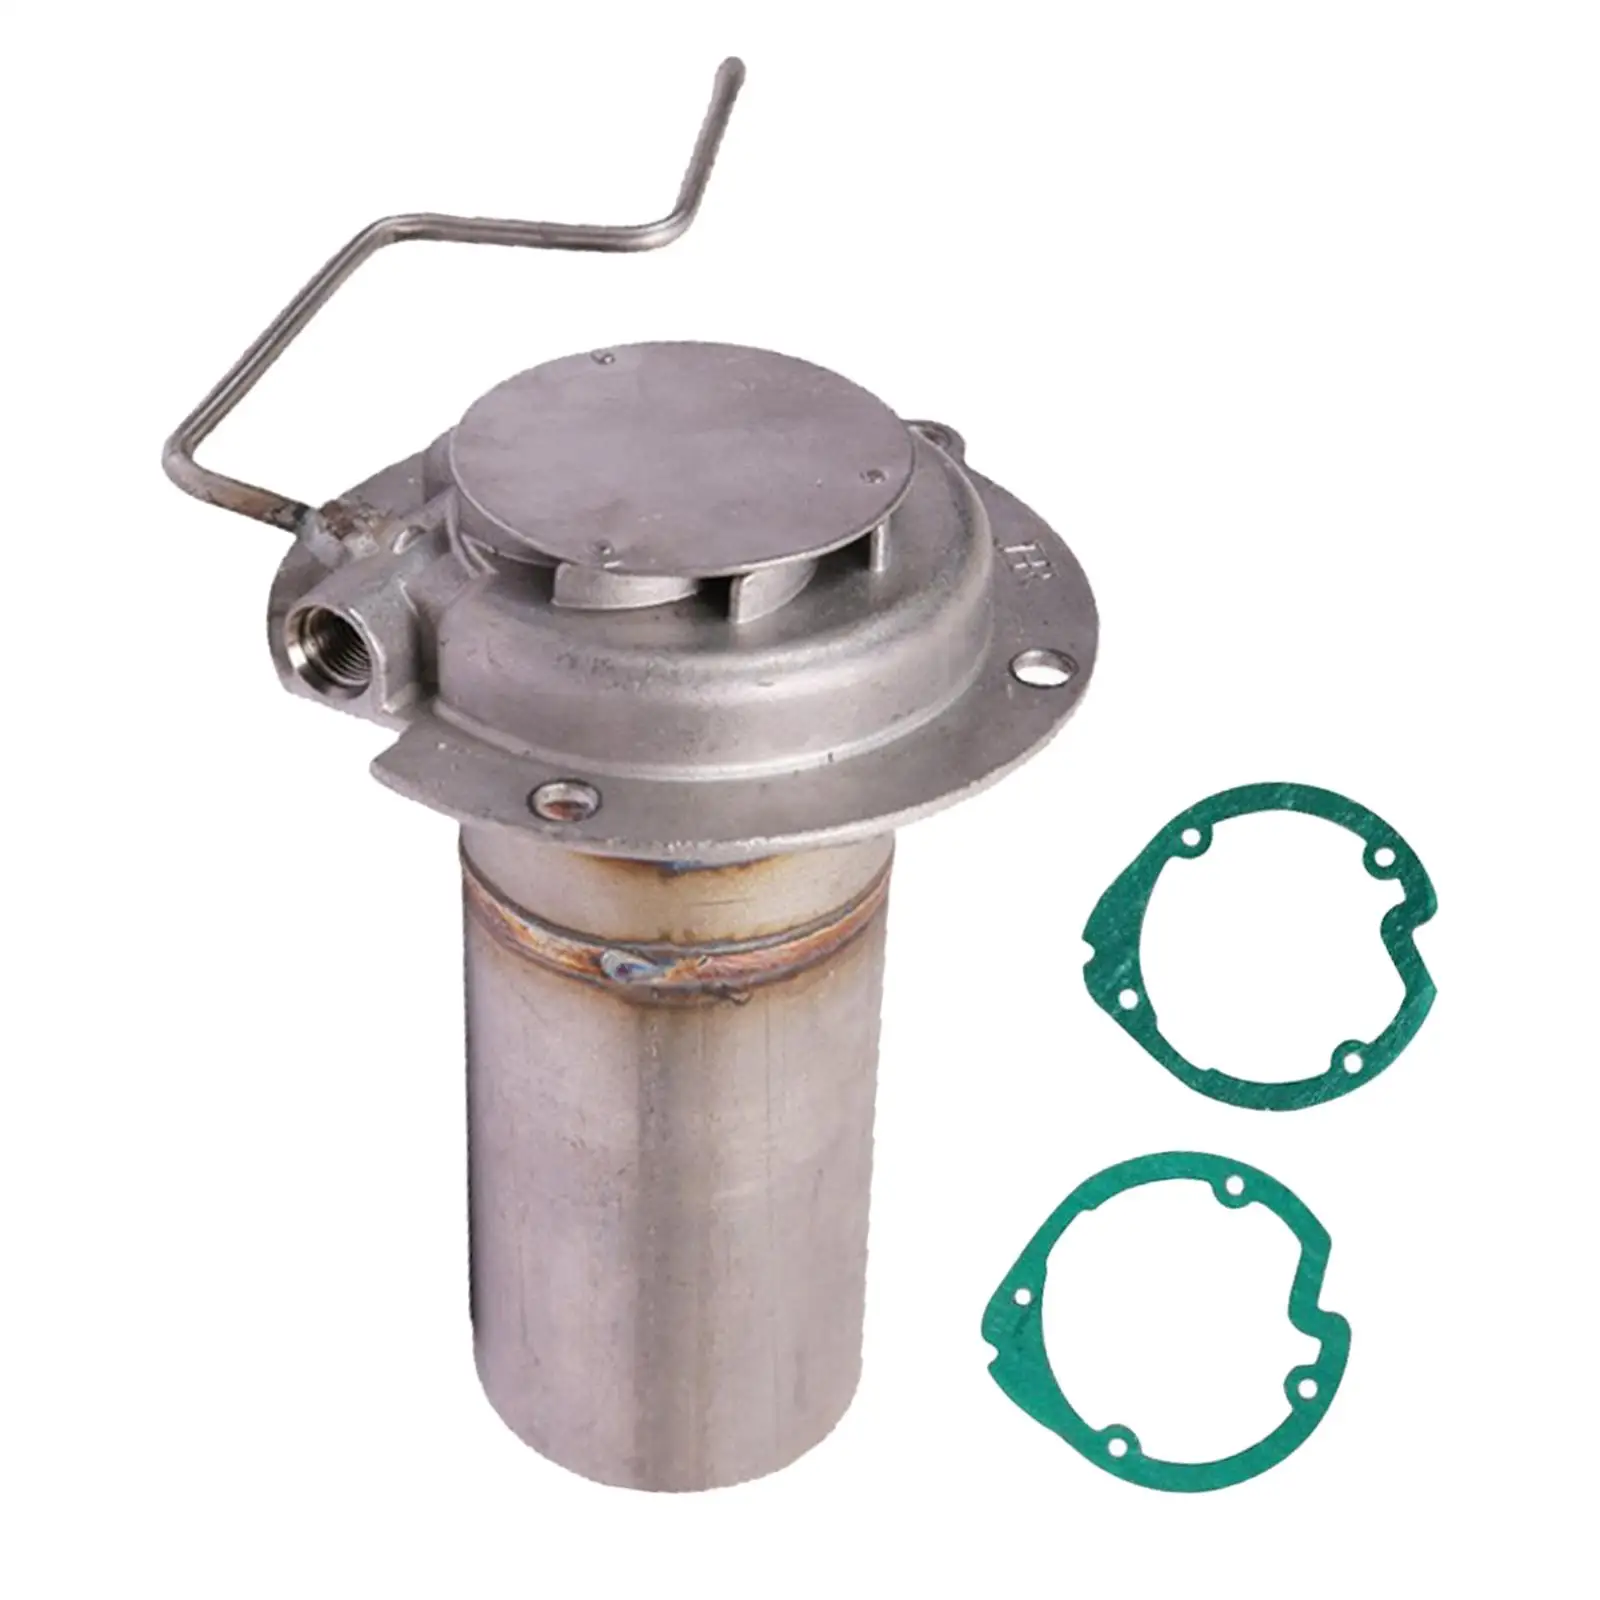 Automotive Combustion Chamber Easily Install Stainless Steel Accessory with Gaskets Combustion Cylinder for Parking Heater